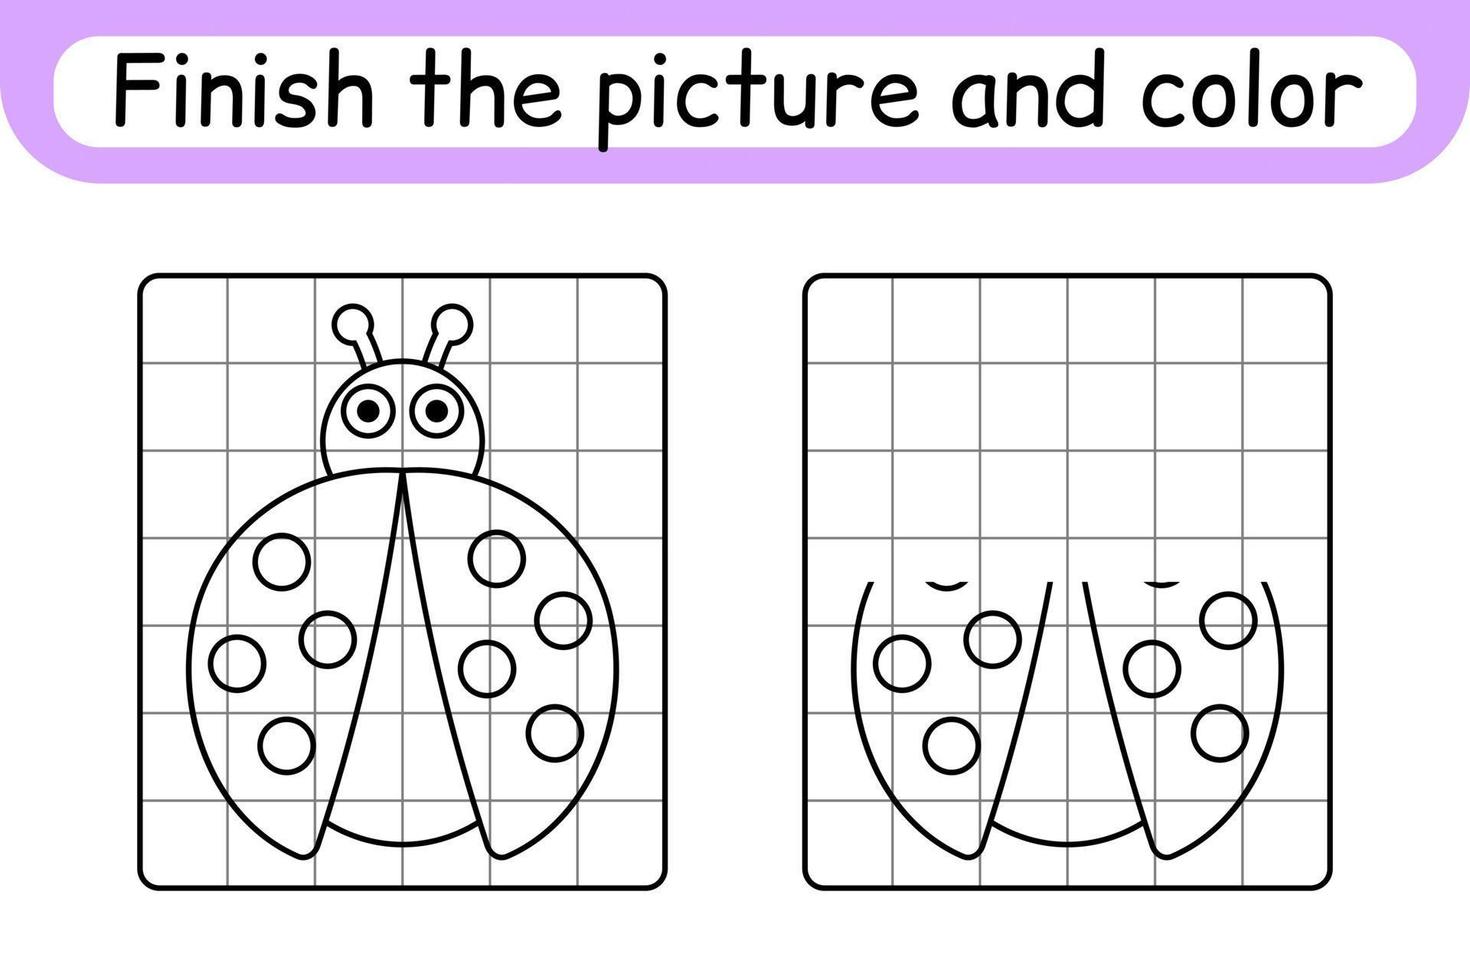 Complete the picture ladybug. Copy the picture and color. Finish the image. Coloring book. Educational drawing exercise game for children vector